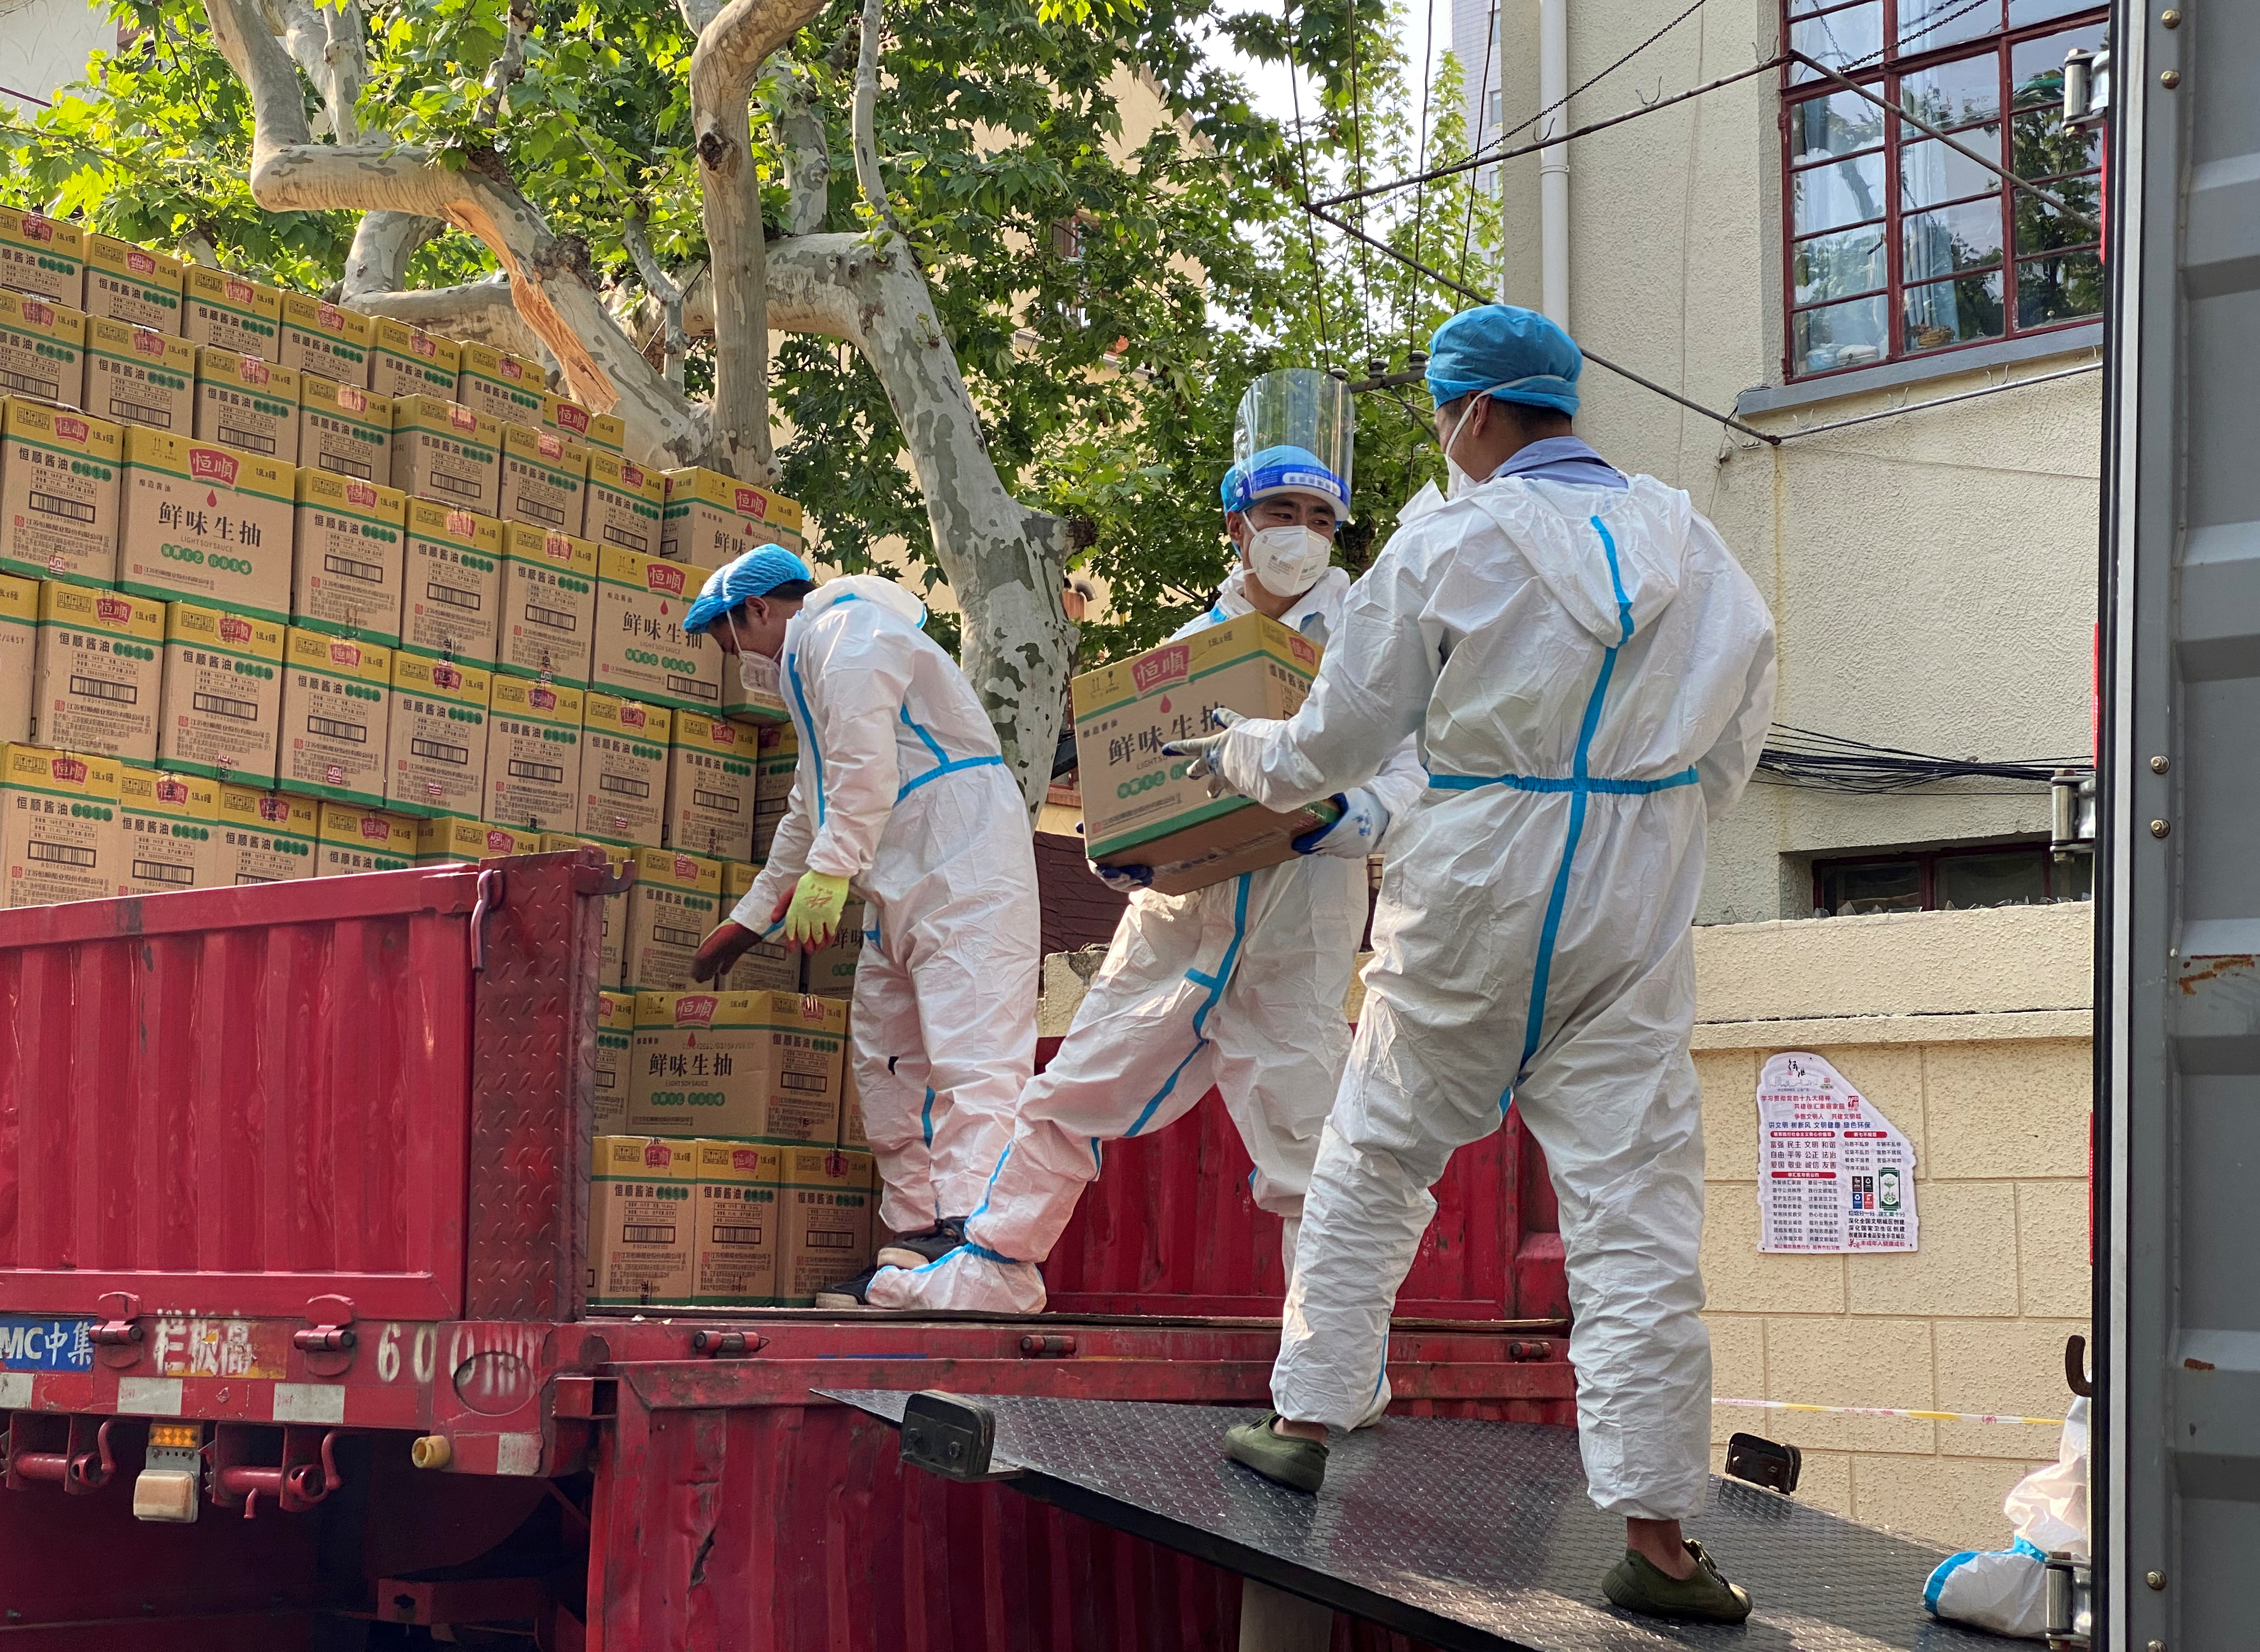 People in protective suits unload boxes labeled soy sauce from a truck, following the coronavirus disease (COVID-19) outbreak in Shanghai